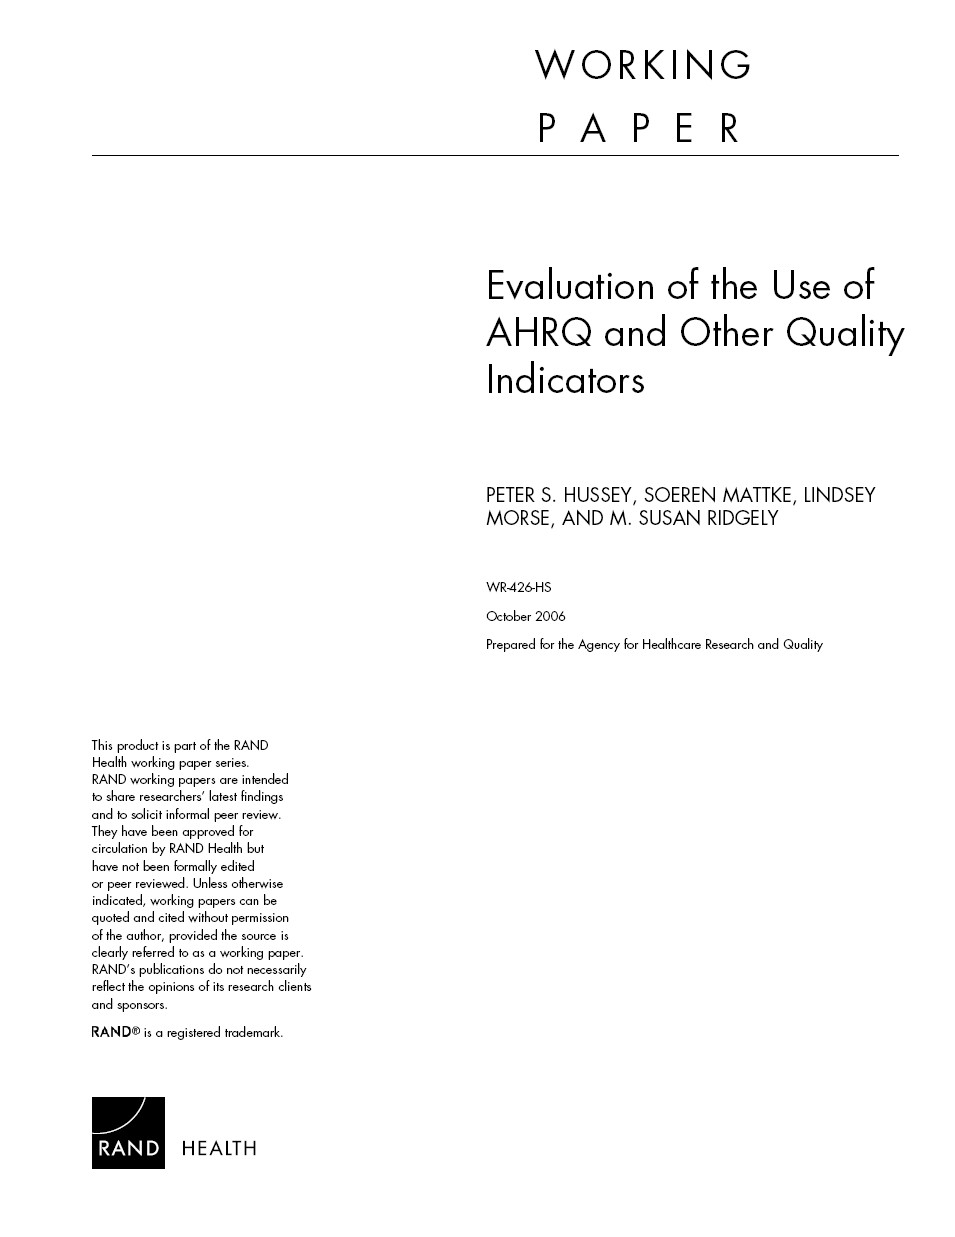 [RAND+-+Evaluation+of+the+Use+of+ARHQ+and+Other+Quality+Indicators.jpg]